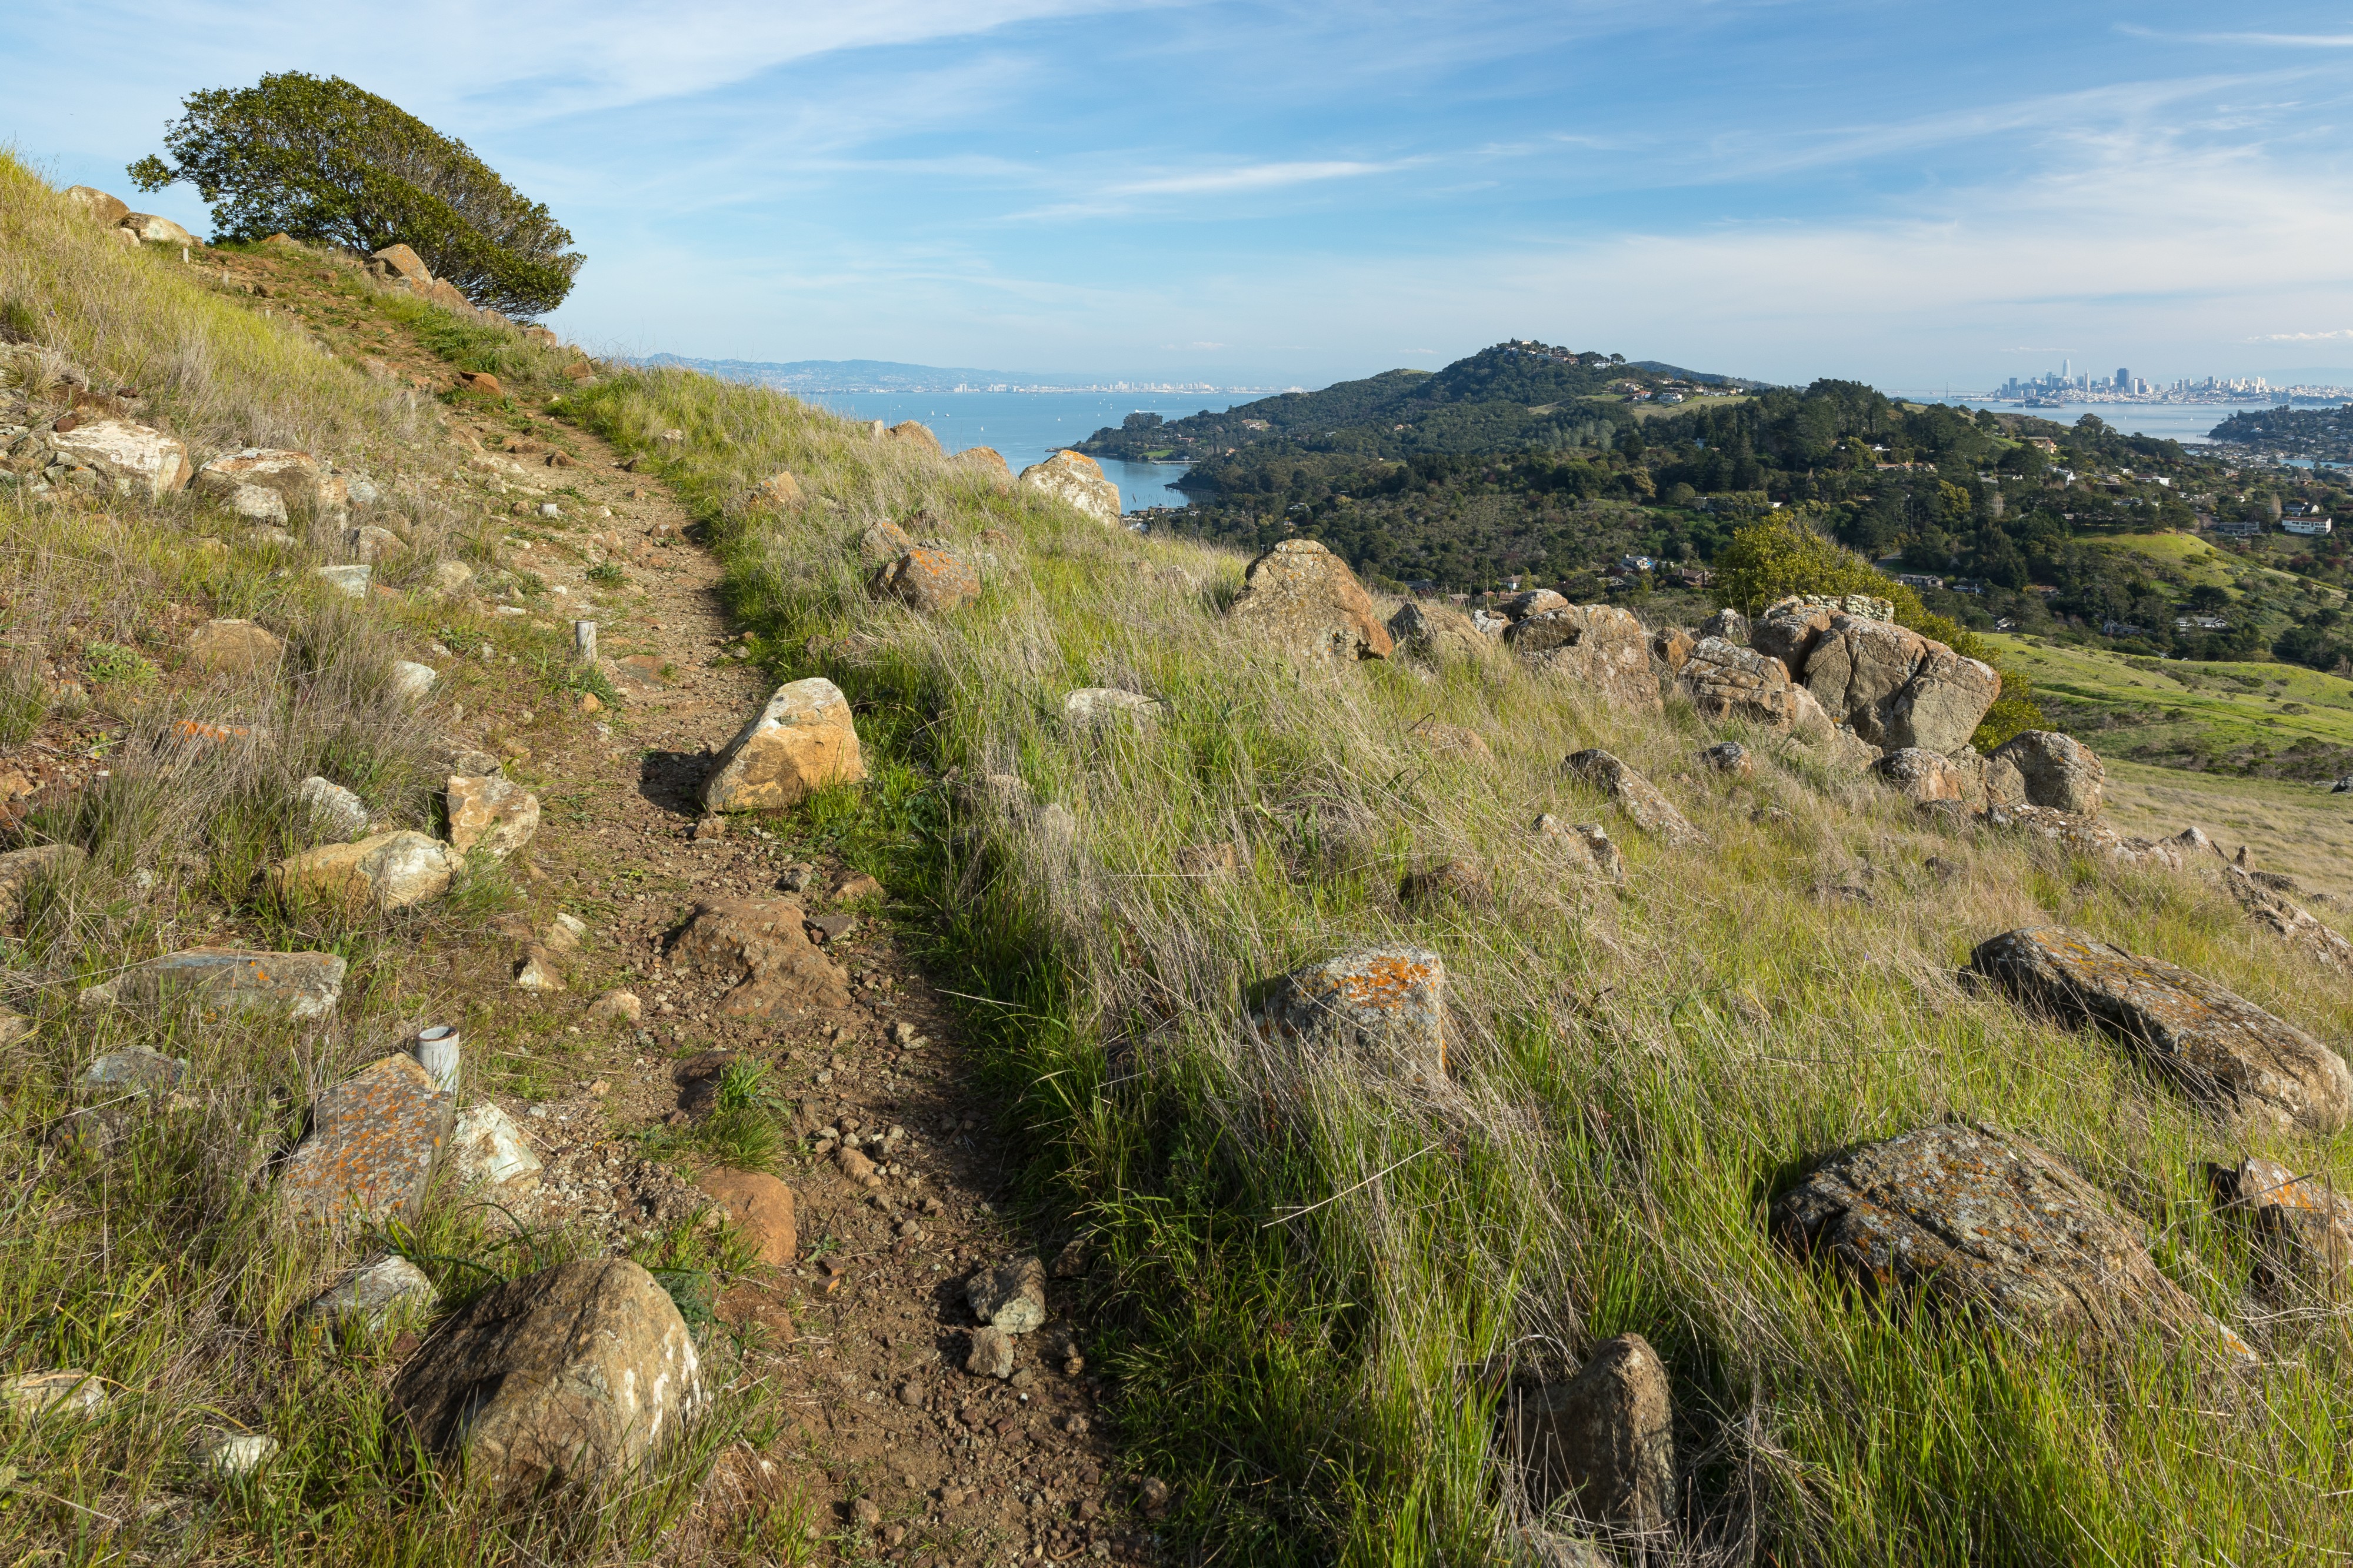 View of the Tiburon Peninsula and the Bay from Ring Mountain